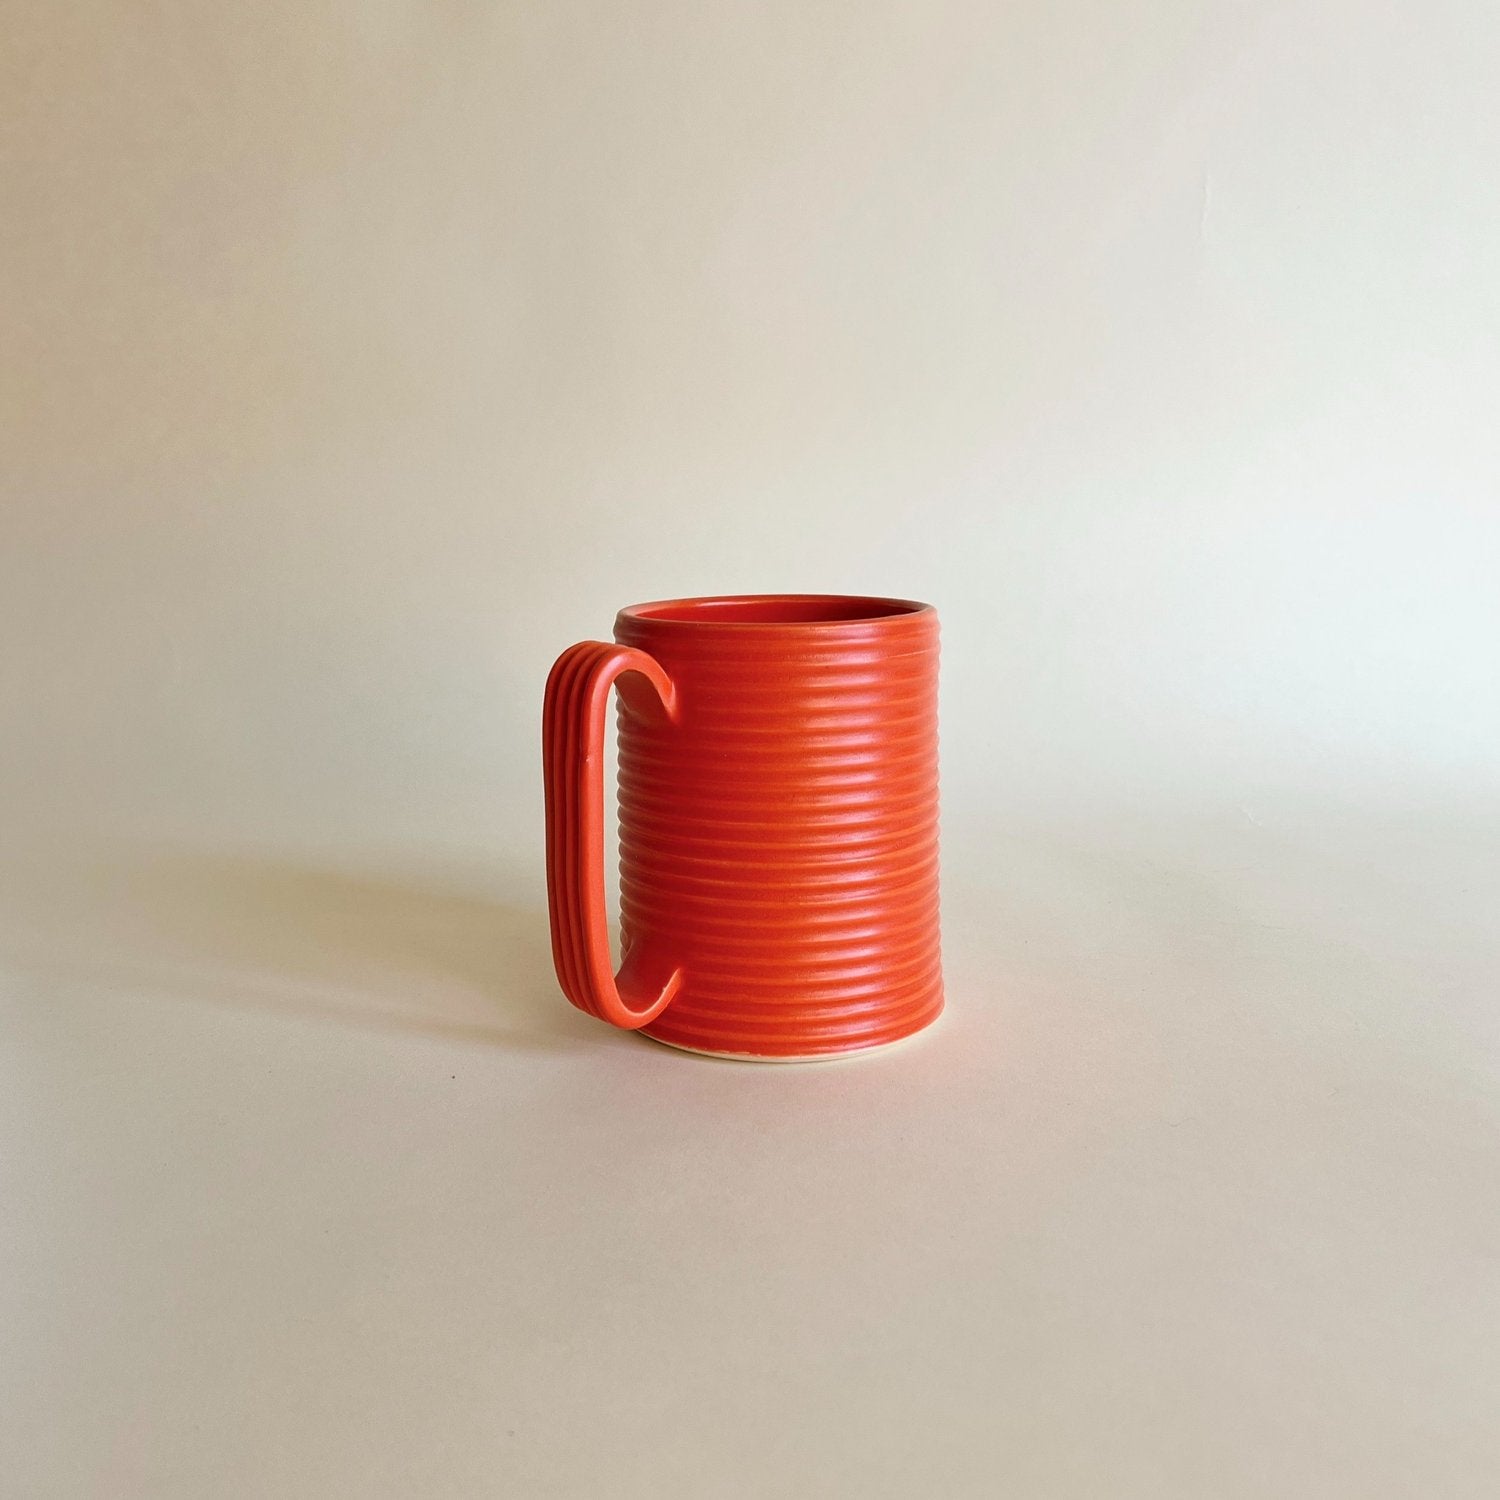 Oversized wheel-thrown ribbed ceramic stoneware mug with handmade glaze in red color